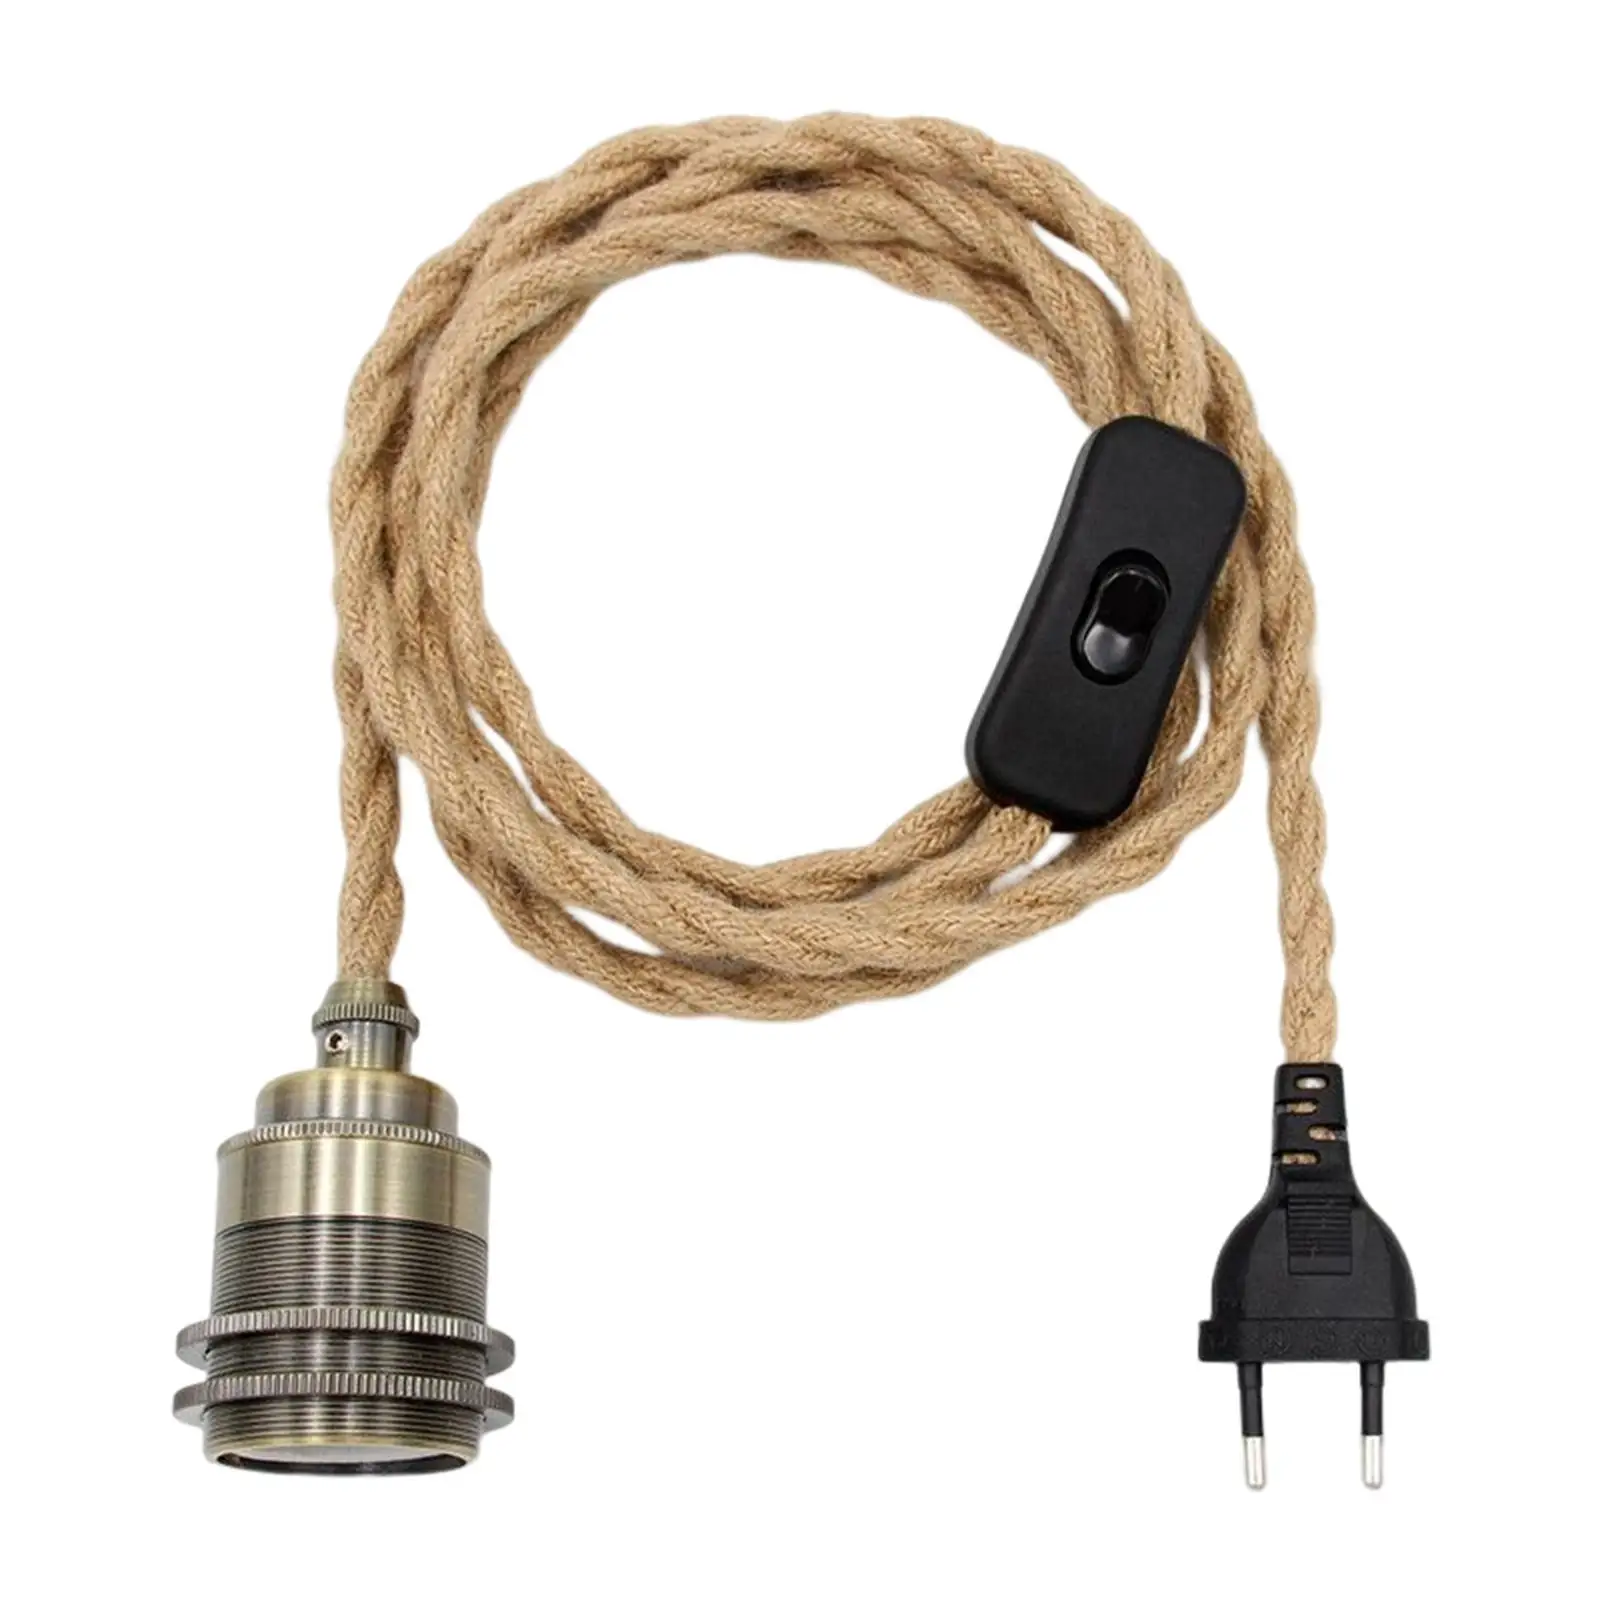 Lamp Power Cord Hanging Light Cord for Bedroom Home Bar Farmhouse Wall Lighing